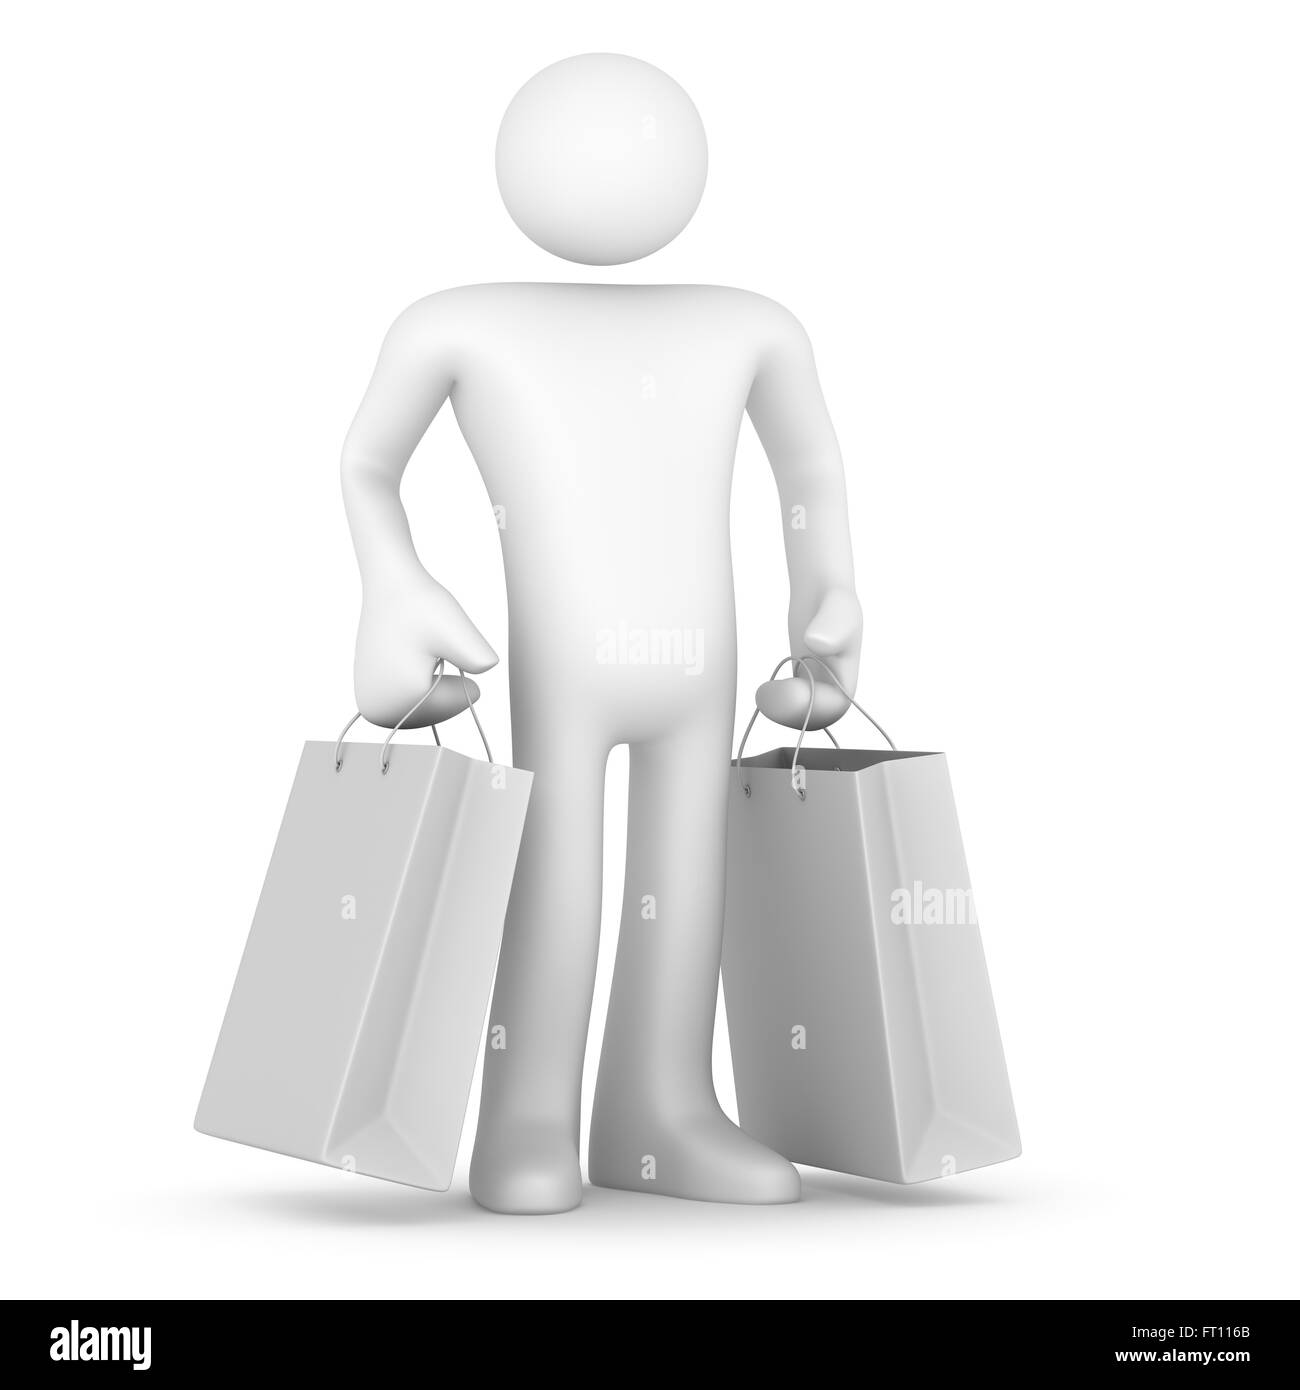 Man with Shopping Bag. Stock Photo